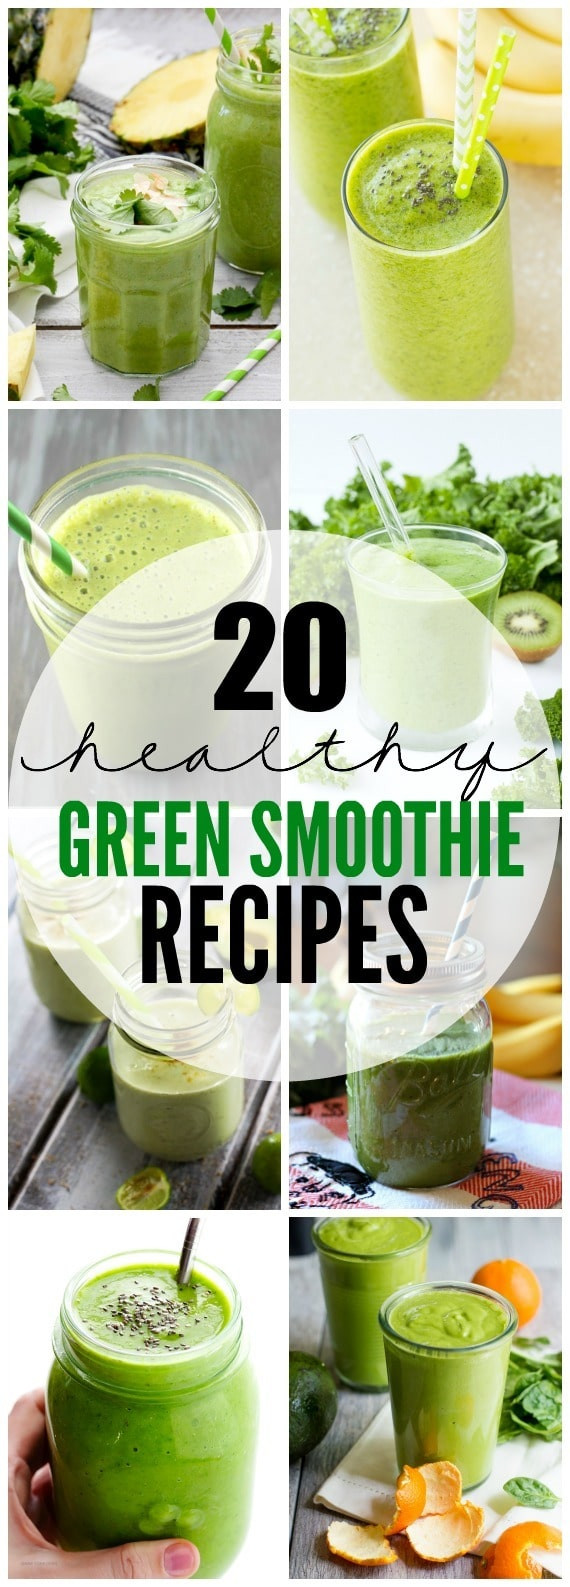 Green Smoothies Recipes
 20 Healthy Green Smoothie Recipes Yummy Healthy Easy